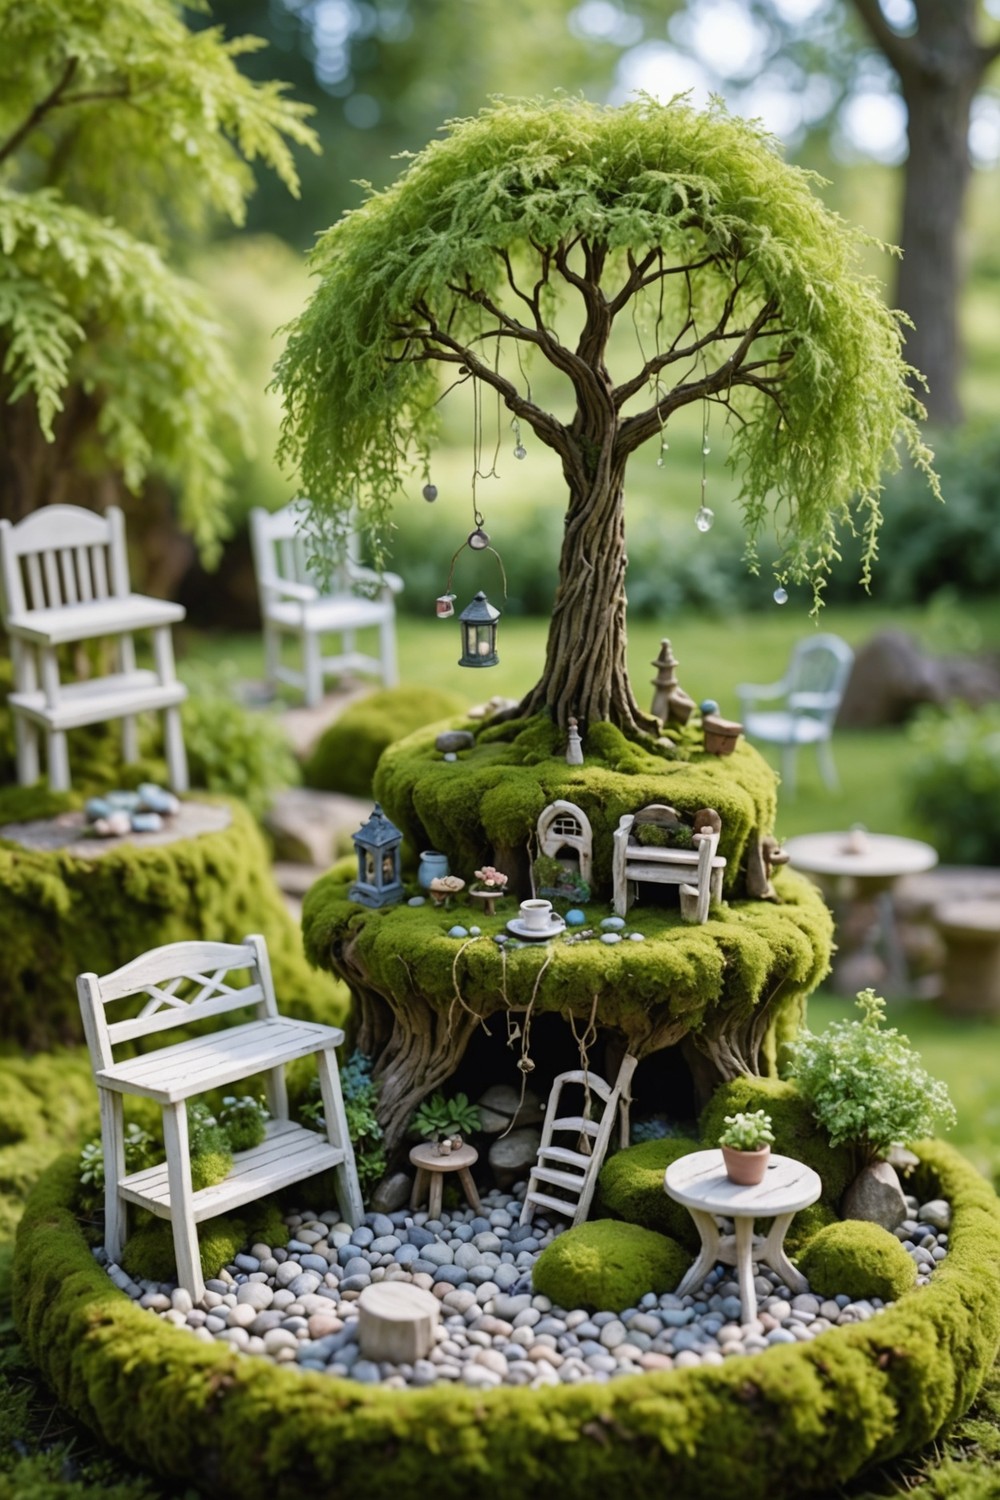 Create a Themed Landscape Around the Tree